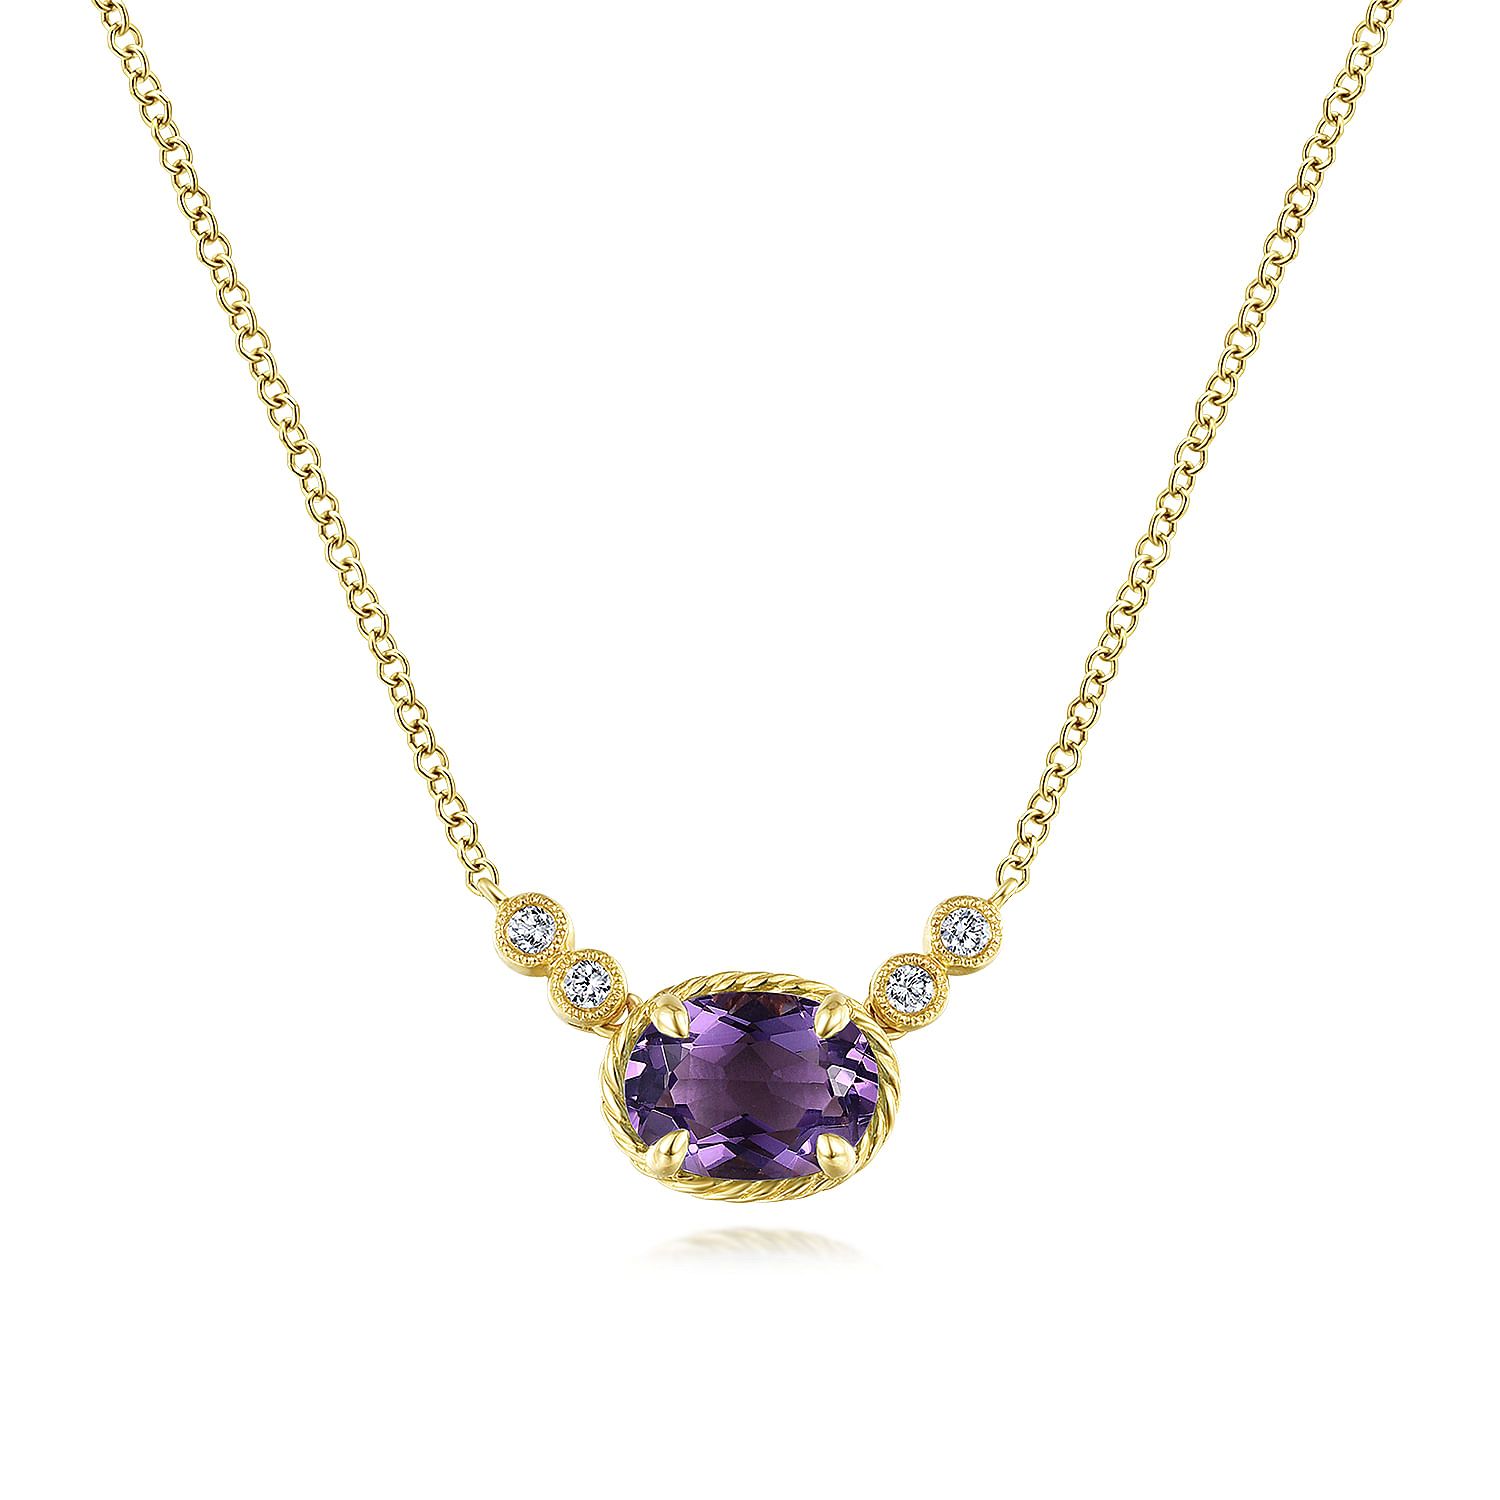 14K Yellow Gold Oval Amethyst Pendant Necklace with Diamond Accents